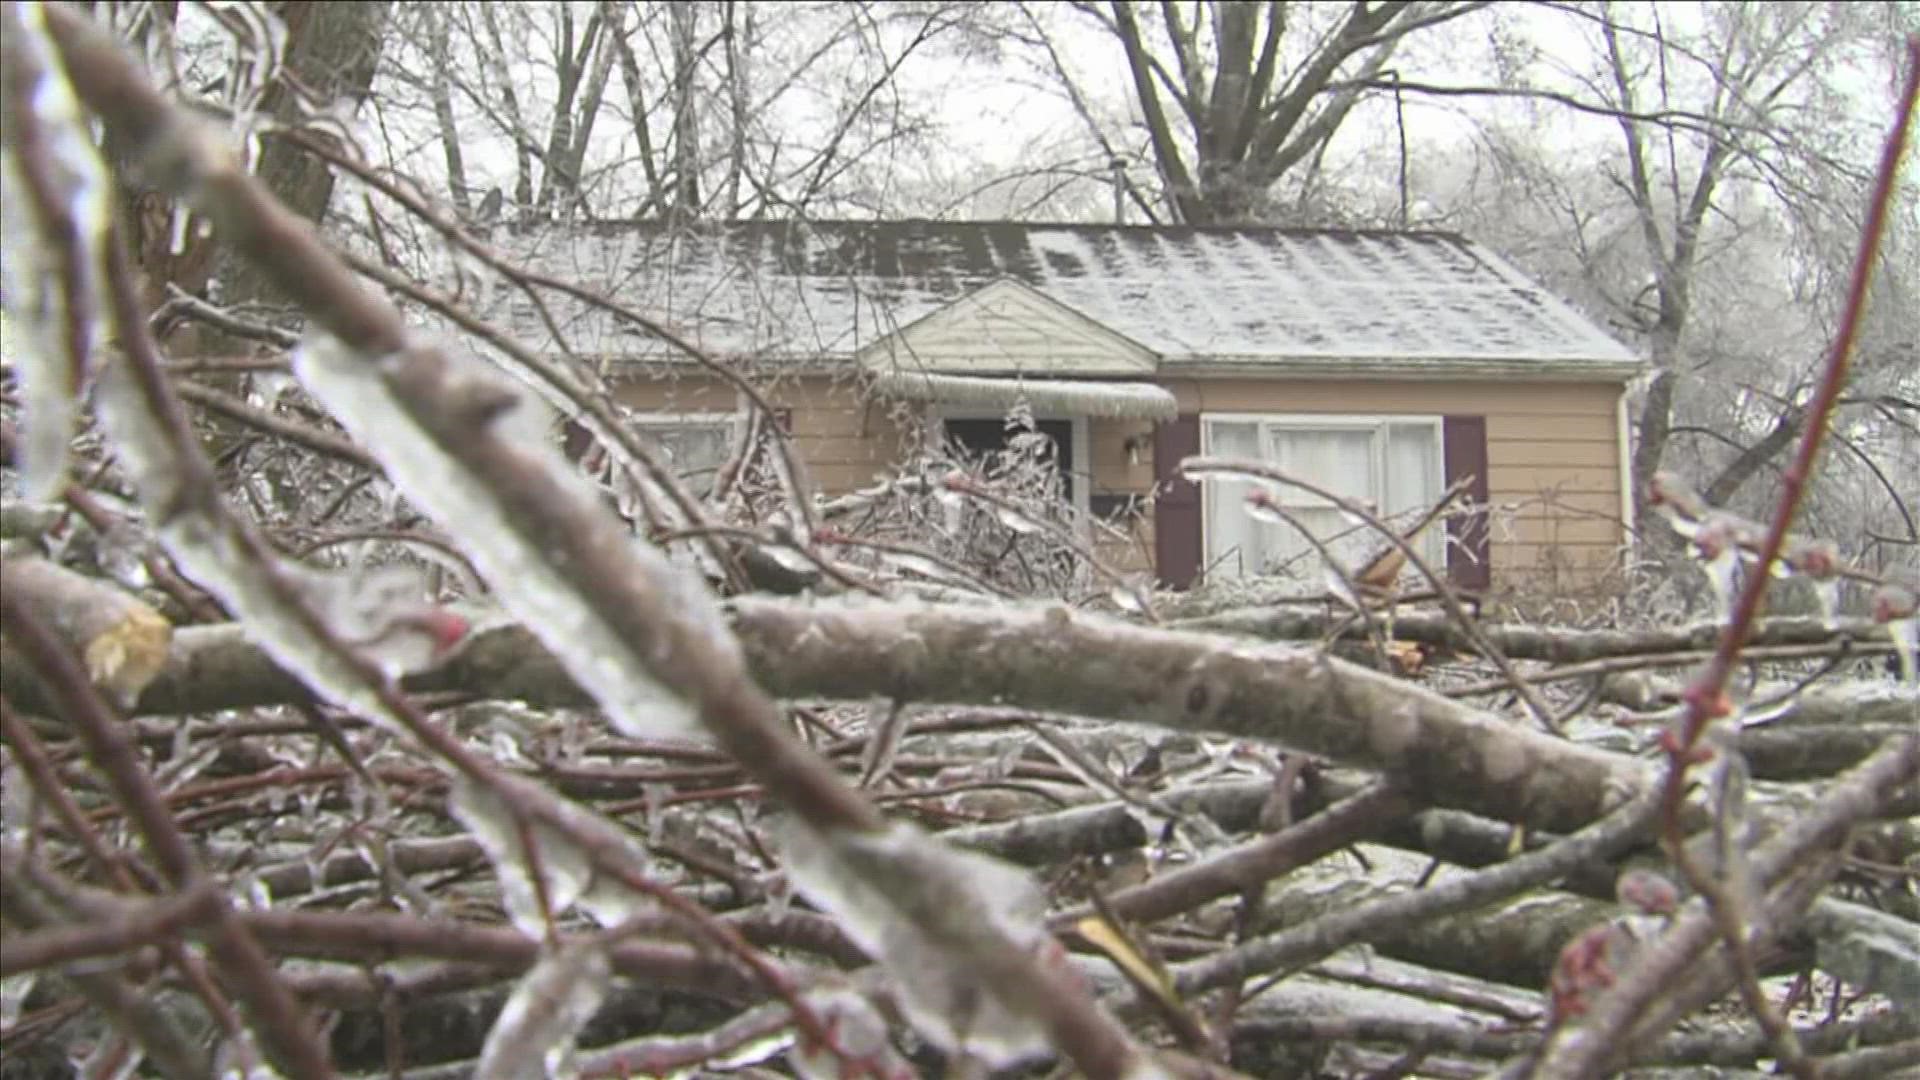 The Better Business Bureau of the Mid-South has some great information if you are looking to hire someone to make repairs after the ice storm.